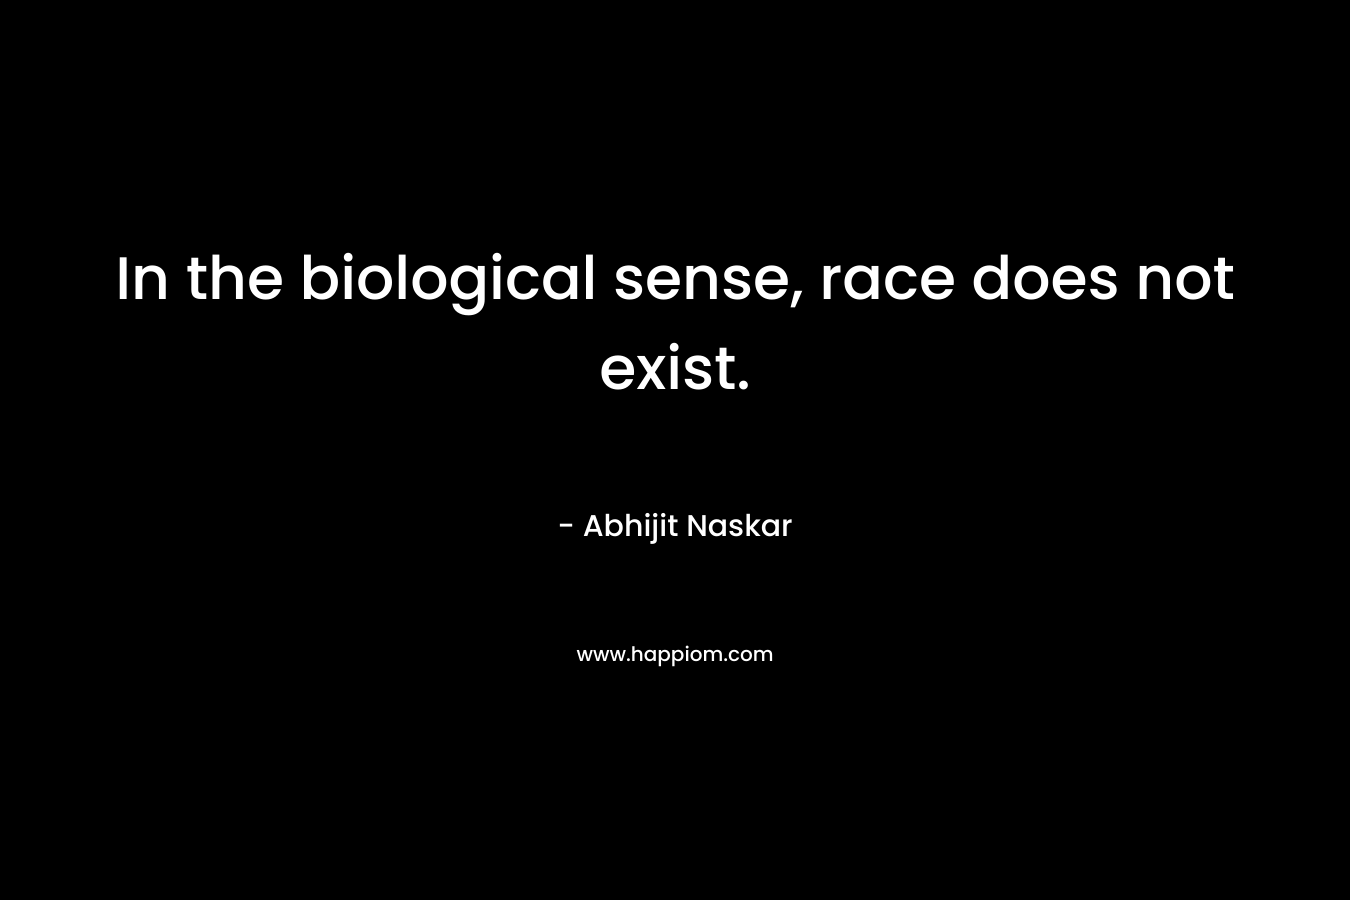 In the biological sense, race does not exist.